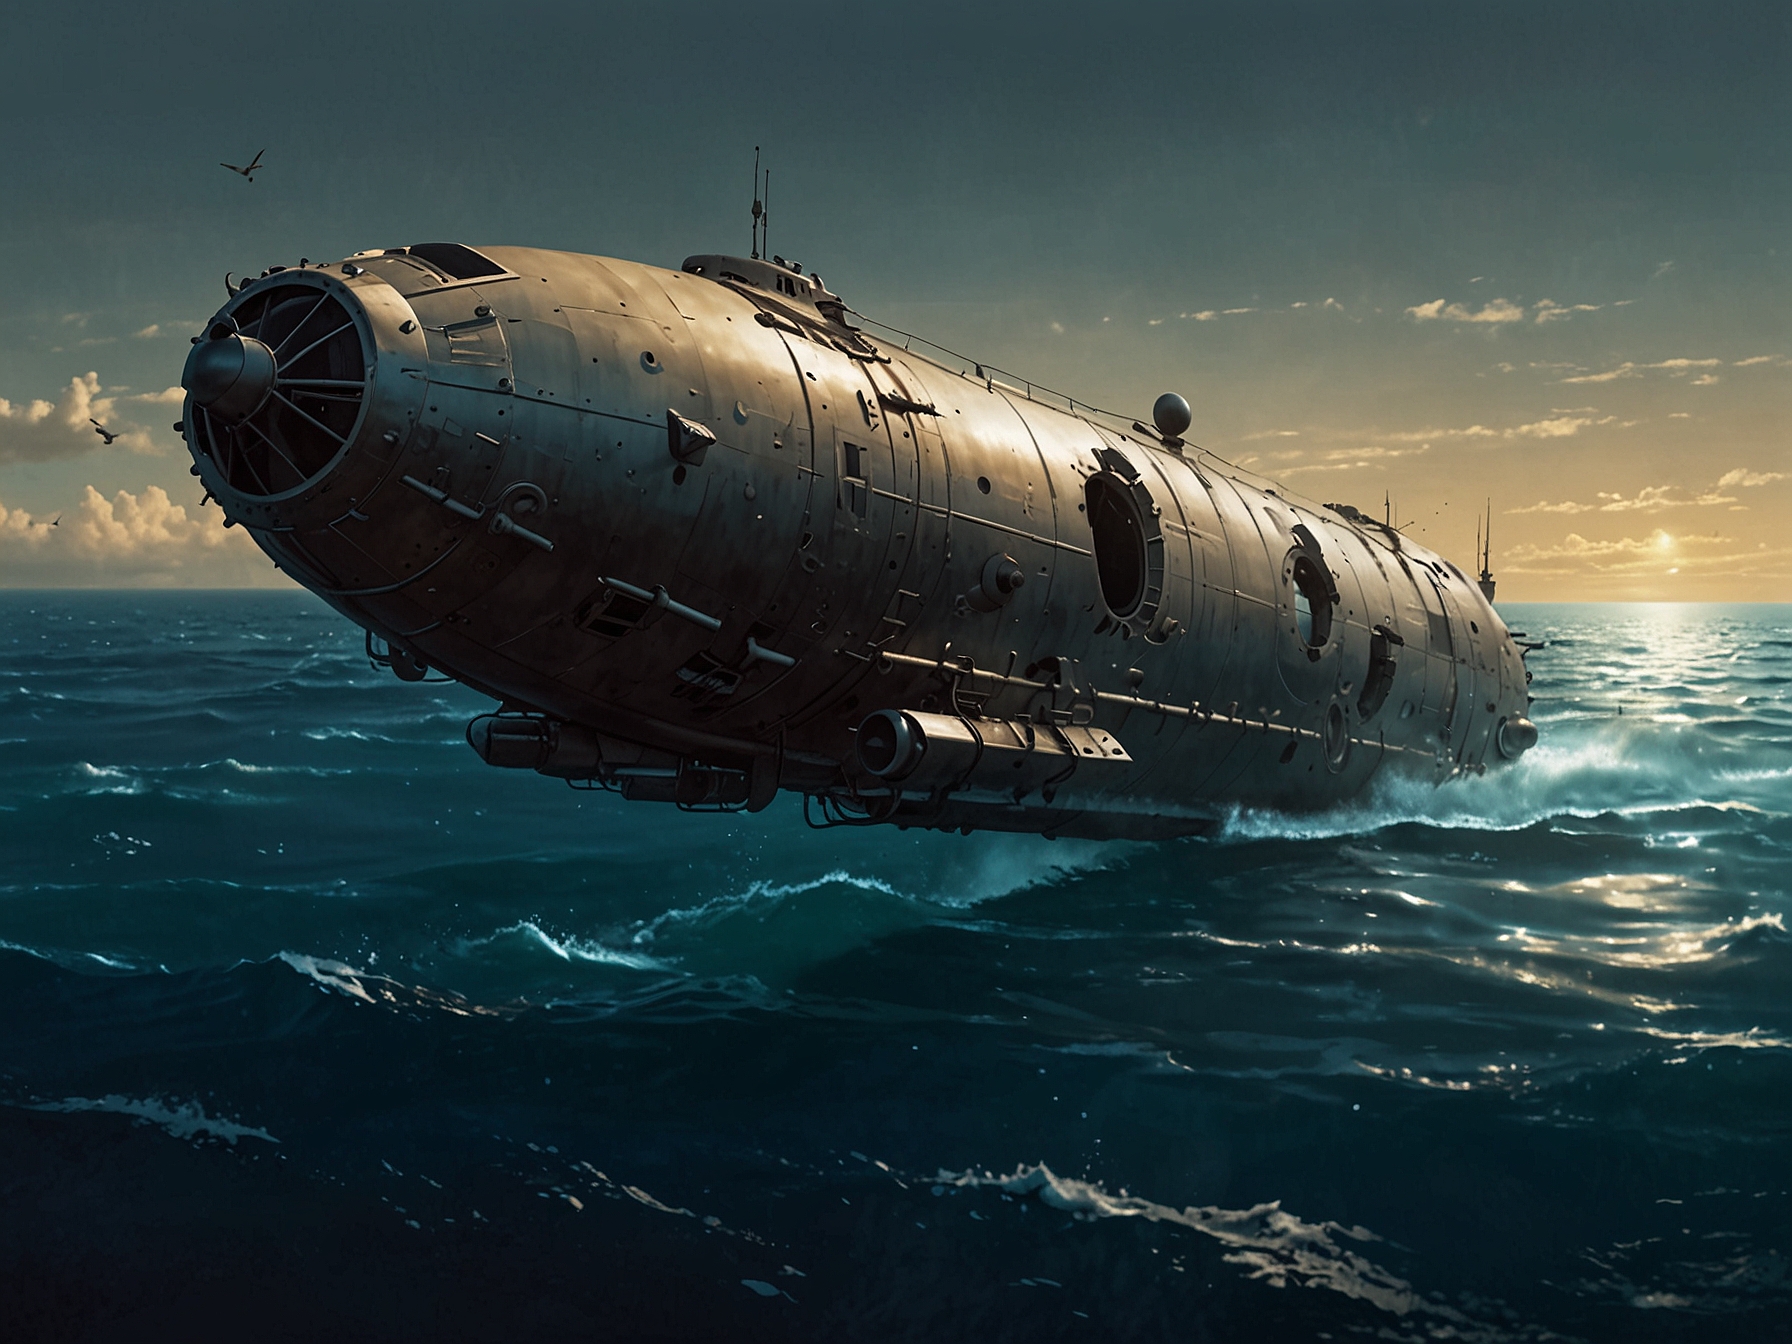 An illustration of the Titan submersible embarking on its final voyage, highlighting the perilous nature and allure of exploring the depths of the ocean.